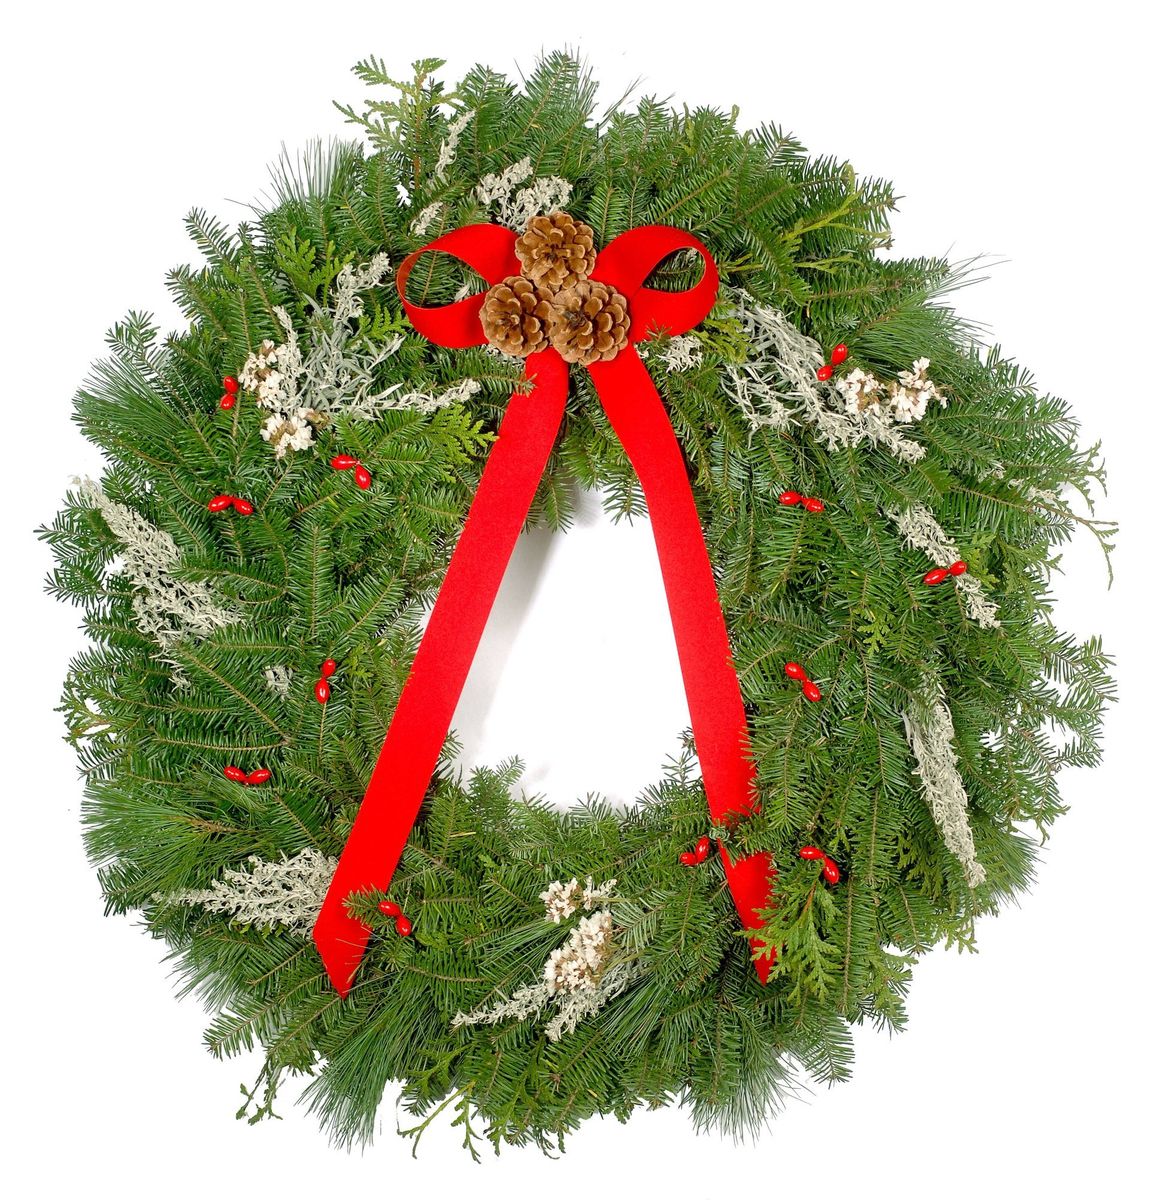 Vermont hand crafted wreaths with white sprigs, red flowers, and red ribbon